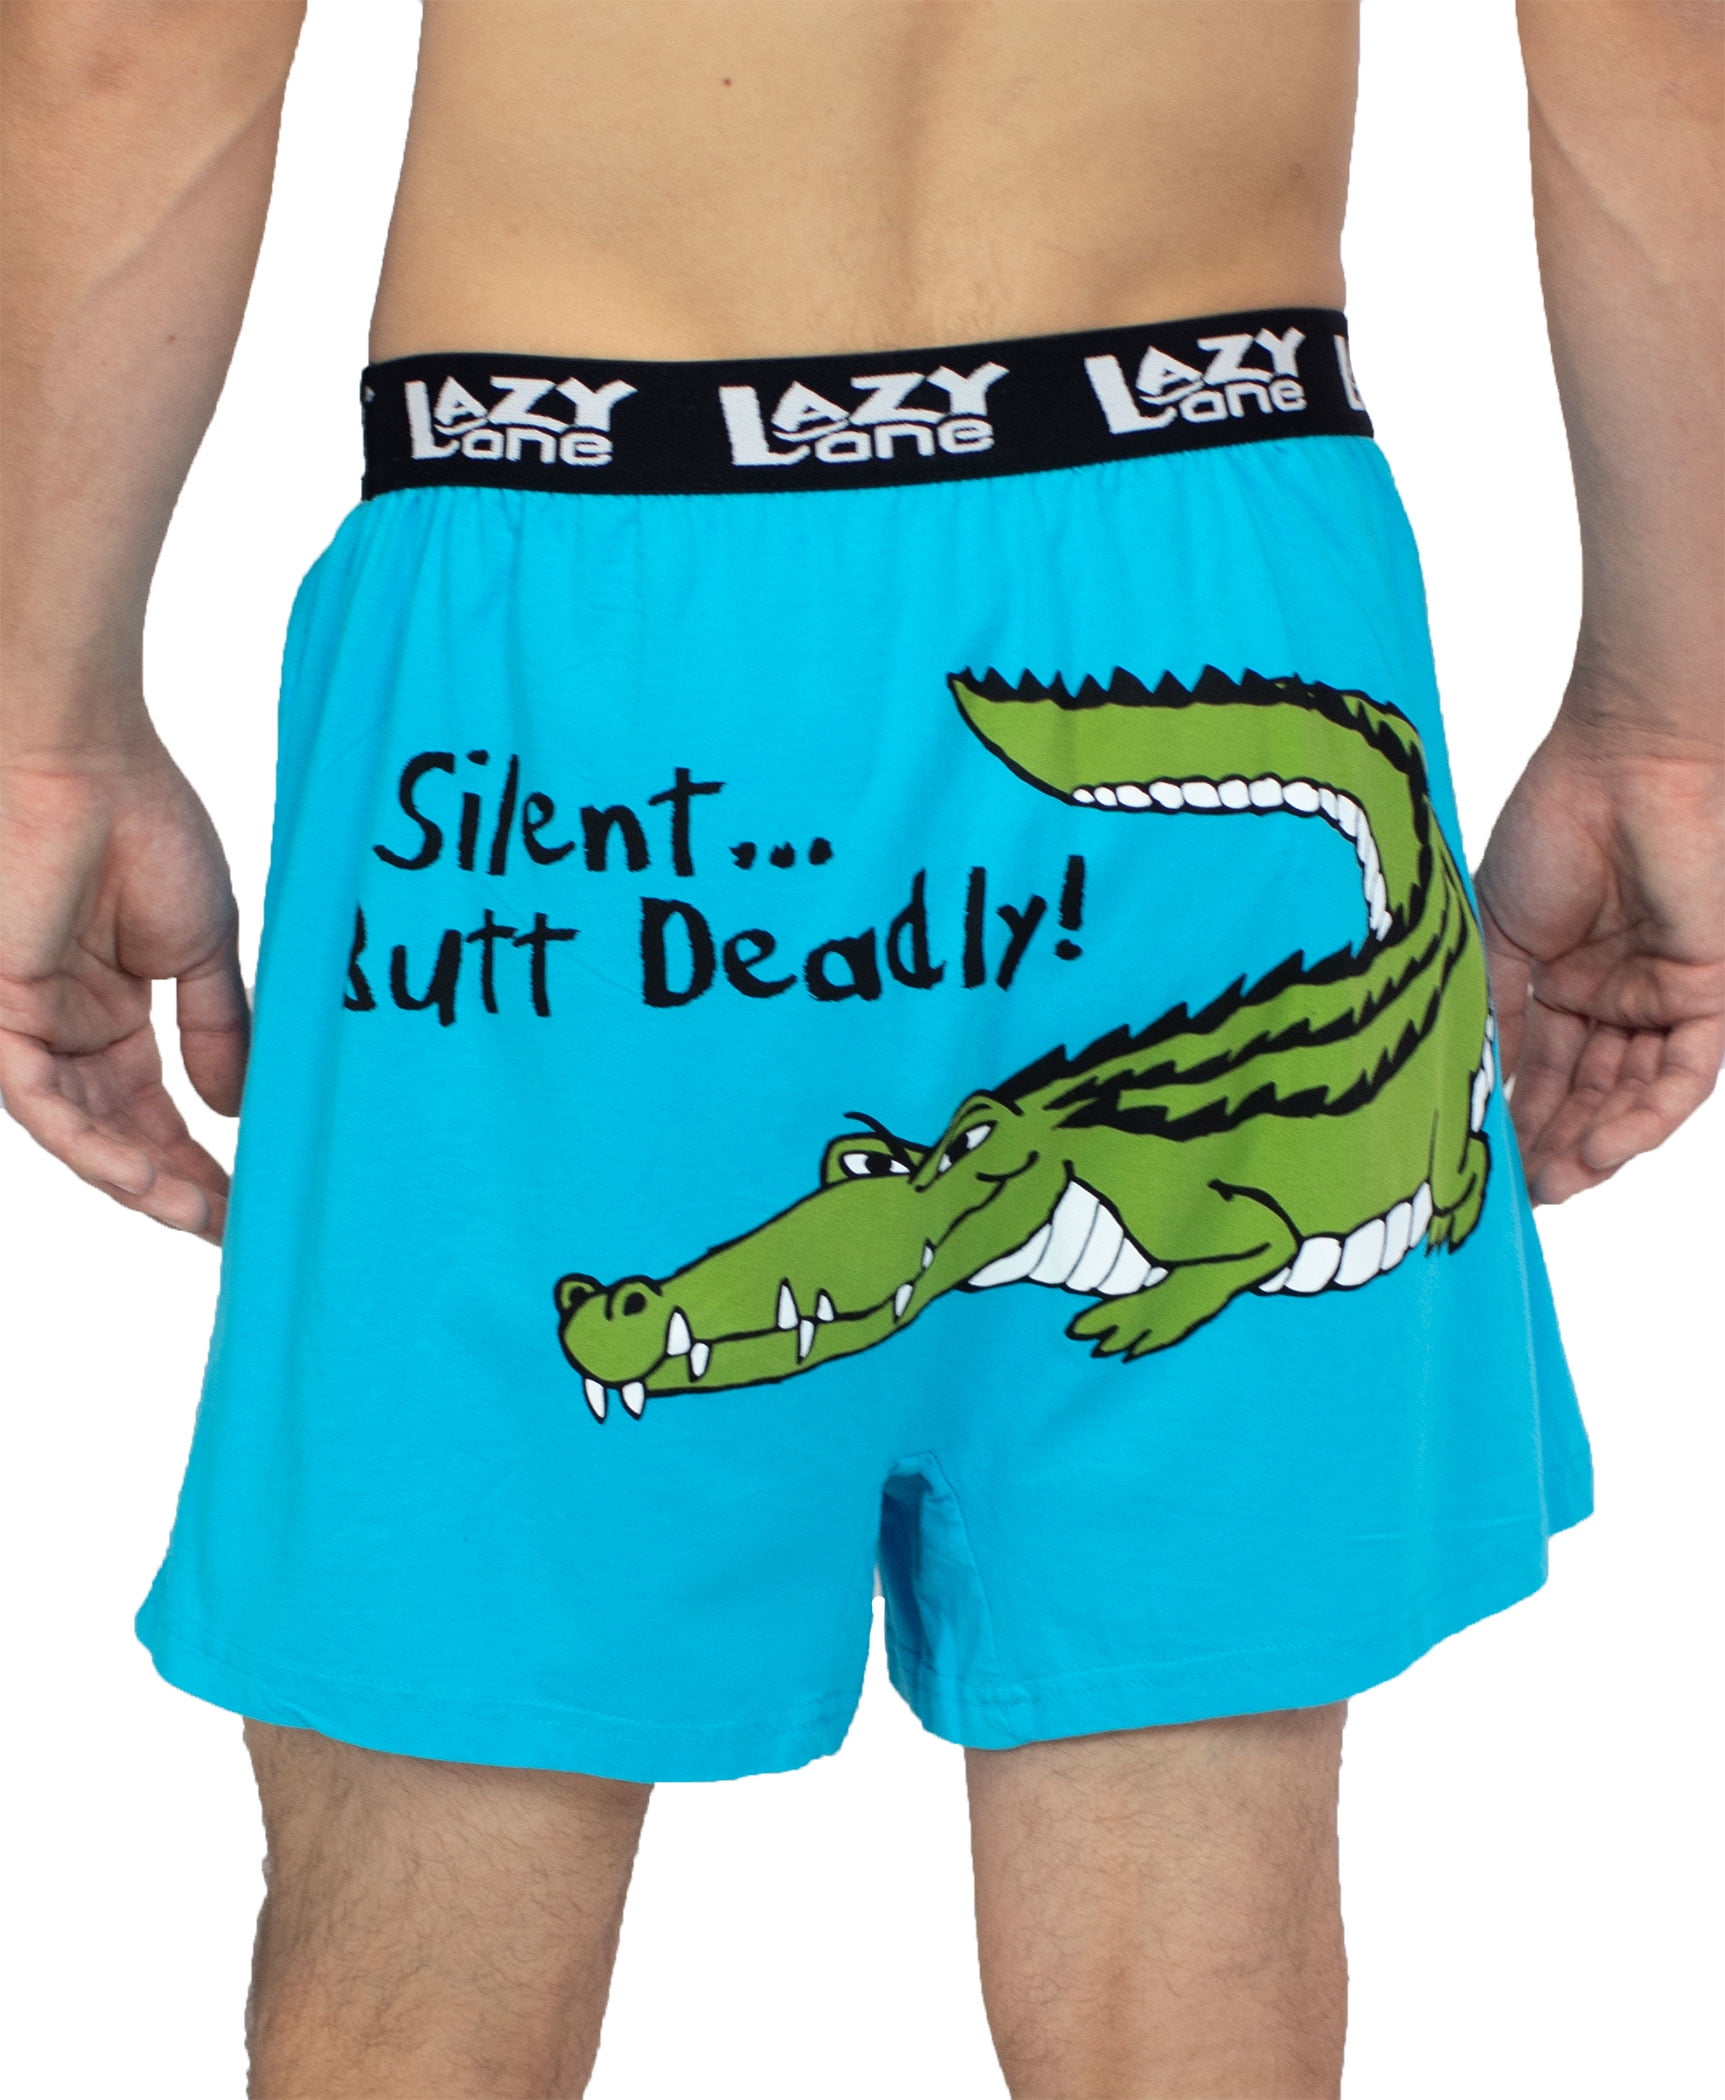 LazyOne Funny Animal Boxers, Deadly Alligator, Humorous Underwear, Gag  Gifts for Men (Medium)